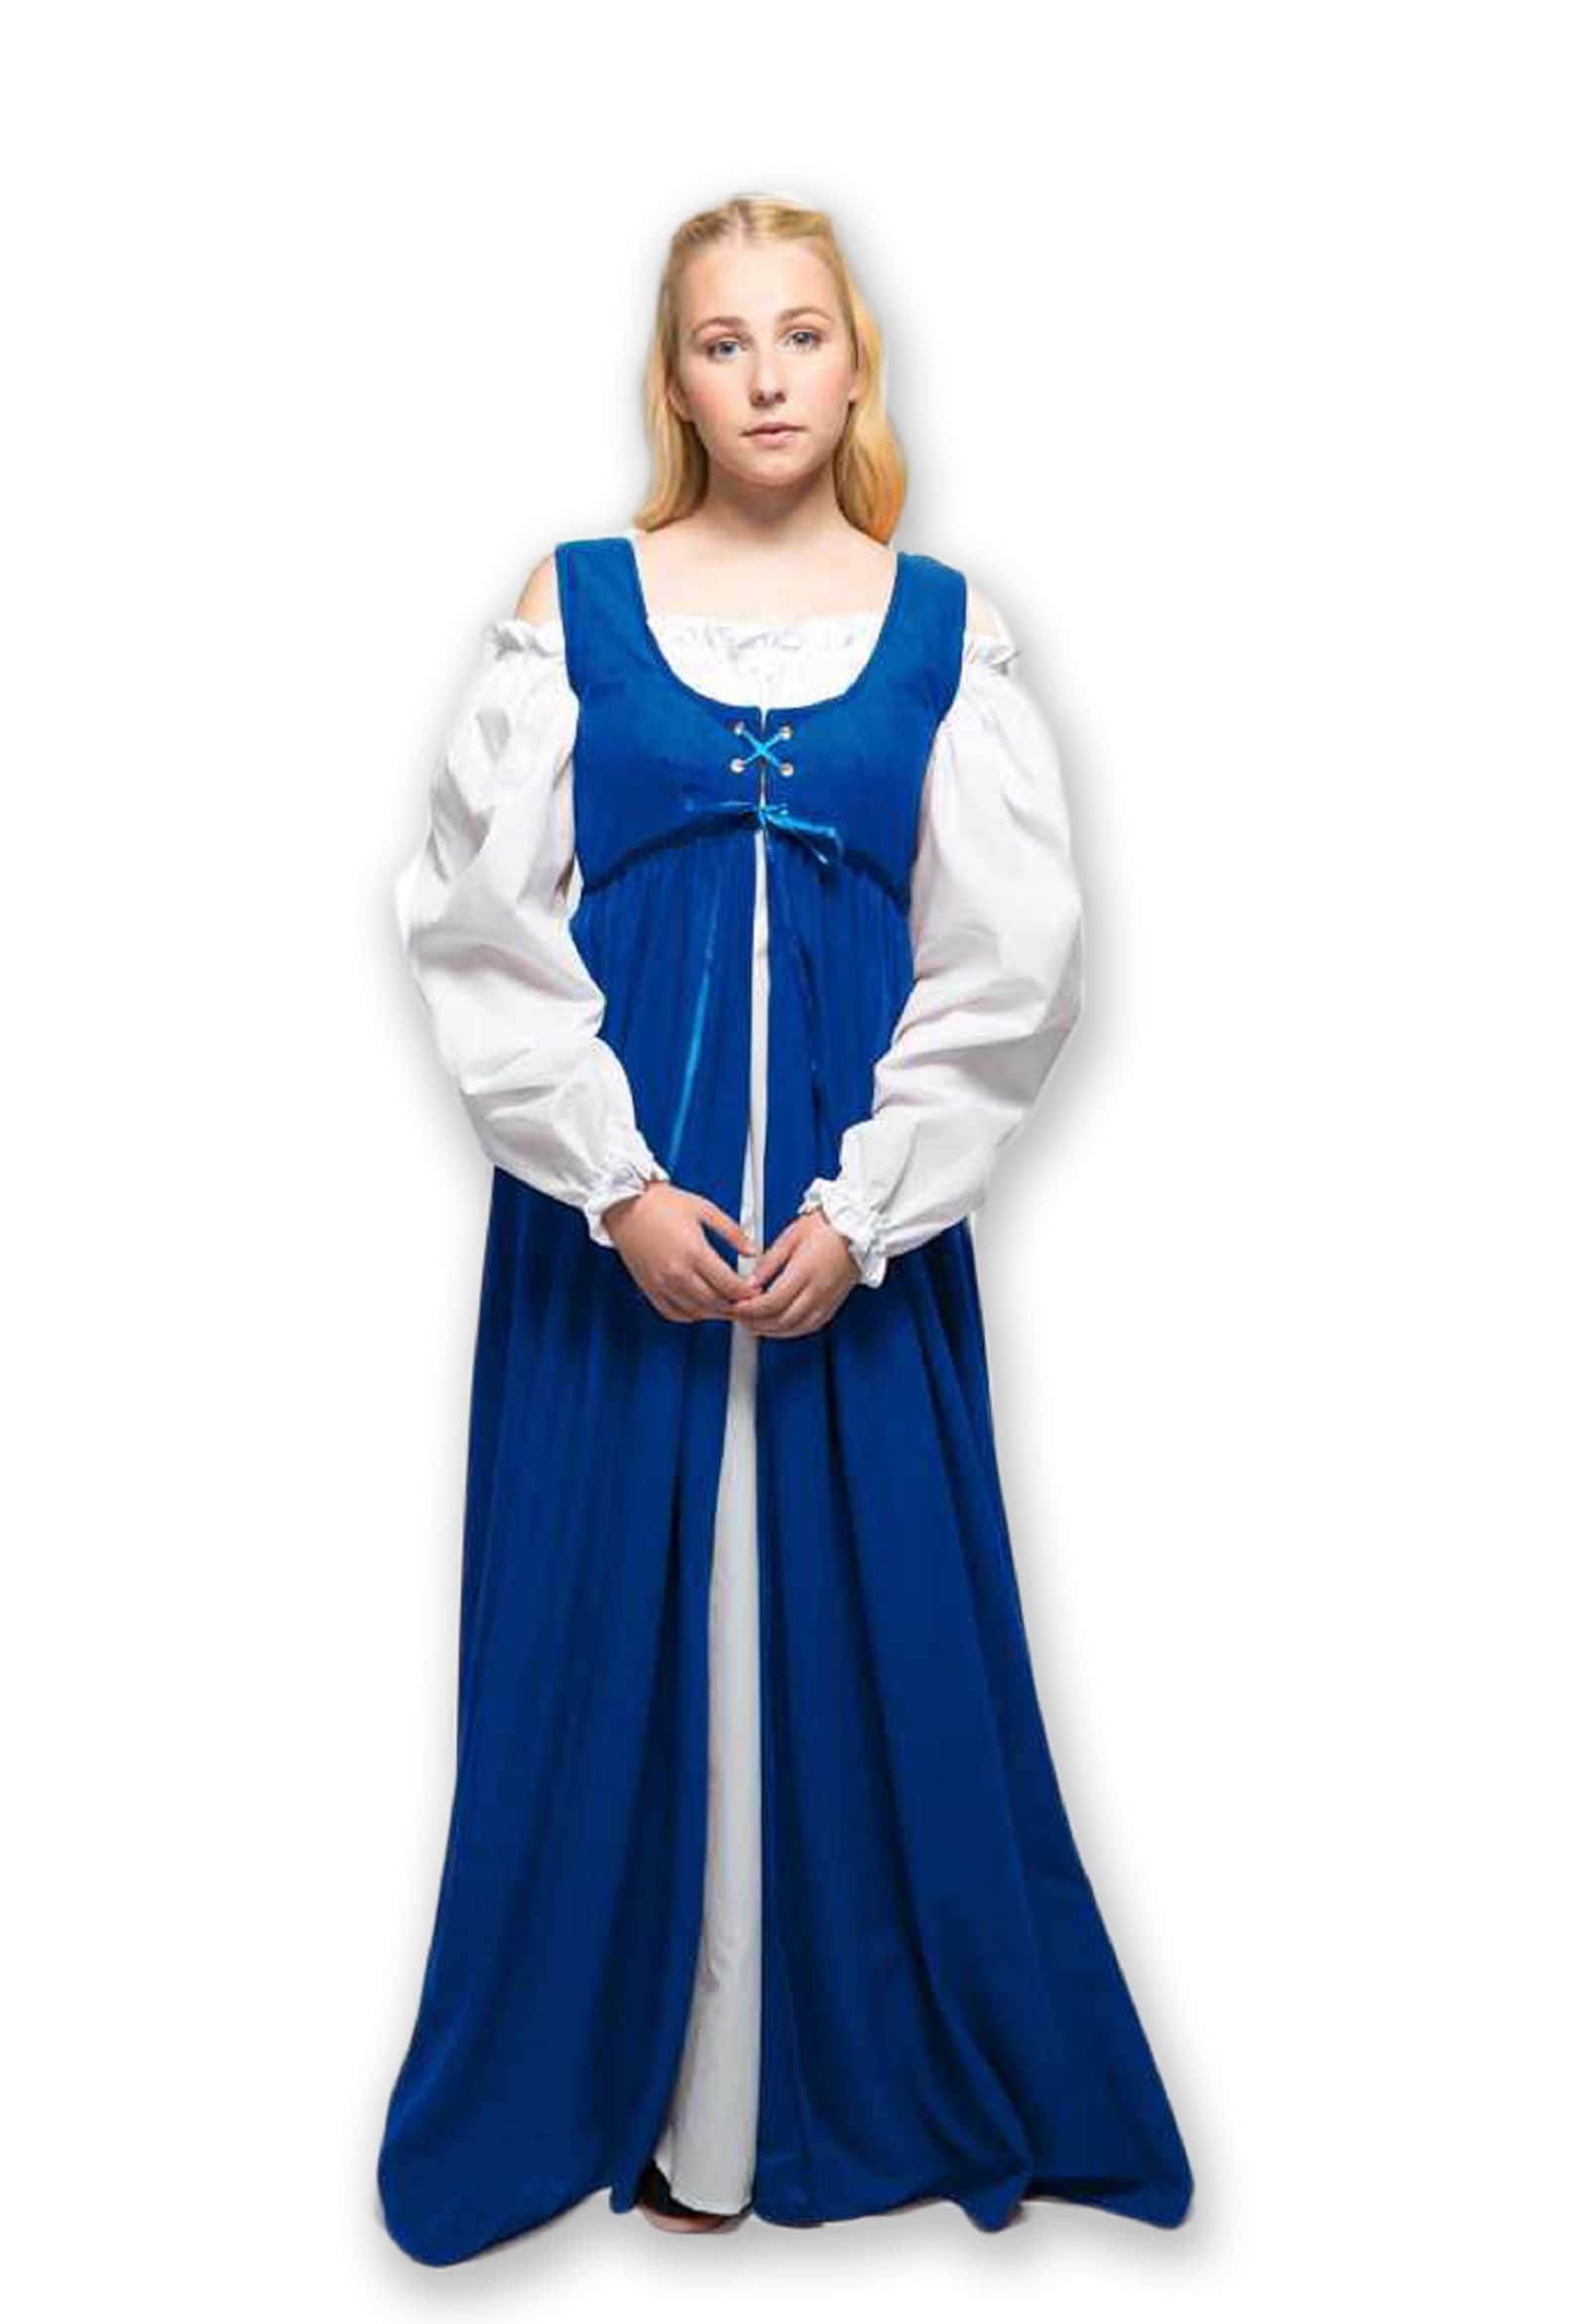 Royal Blue Medieval Dress Renaissance Peasant Gown with White | Etsy